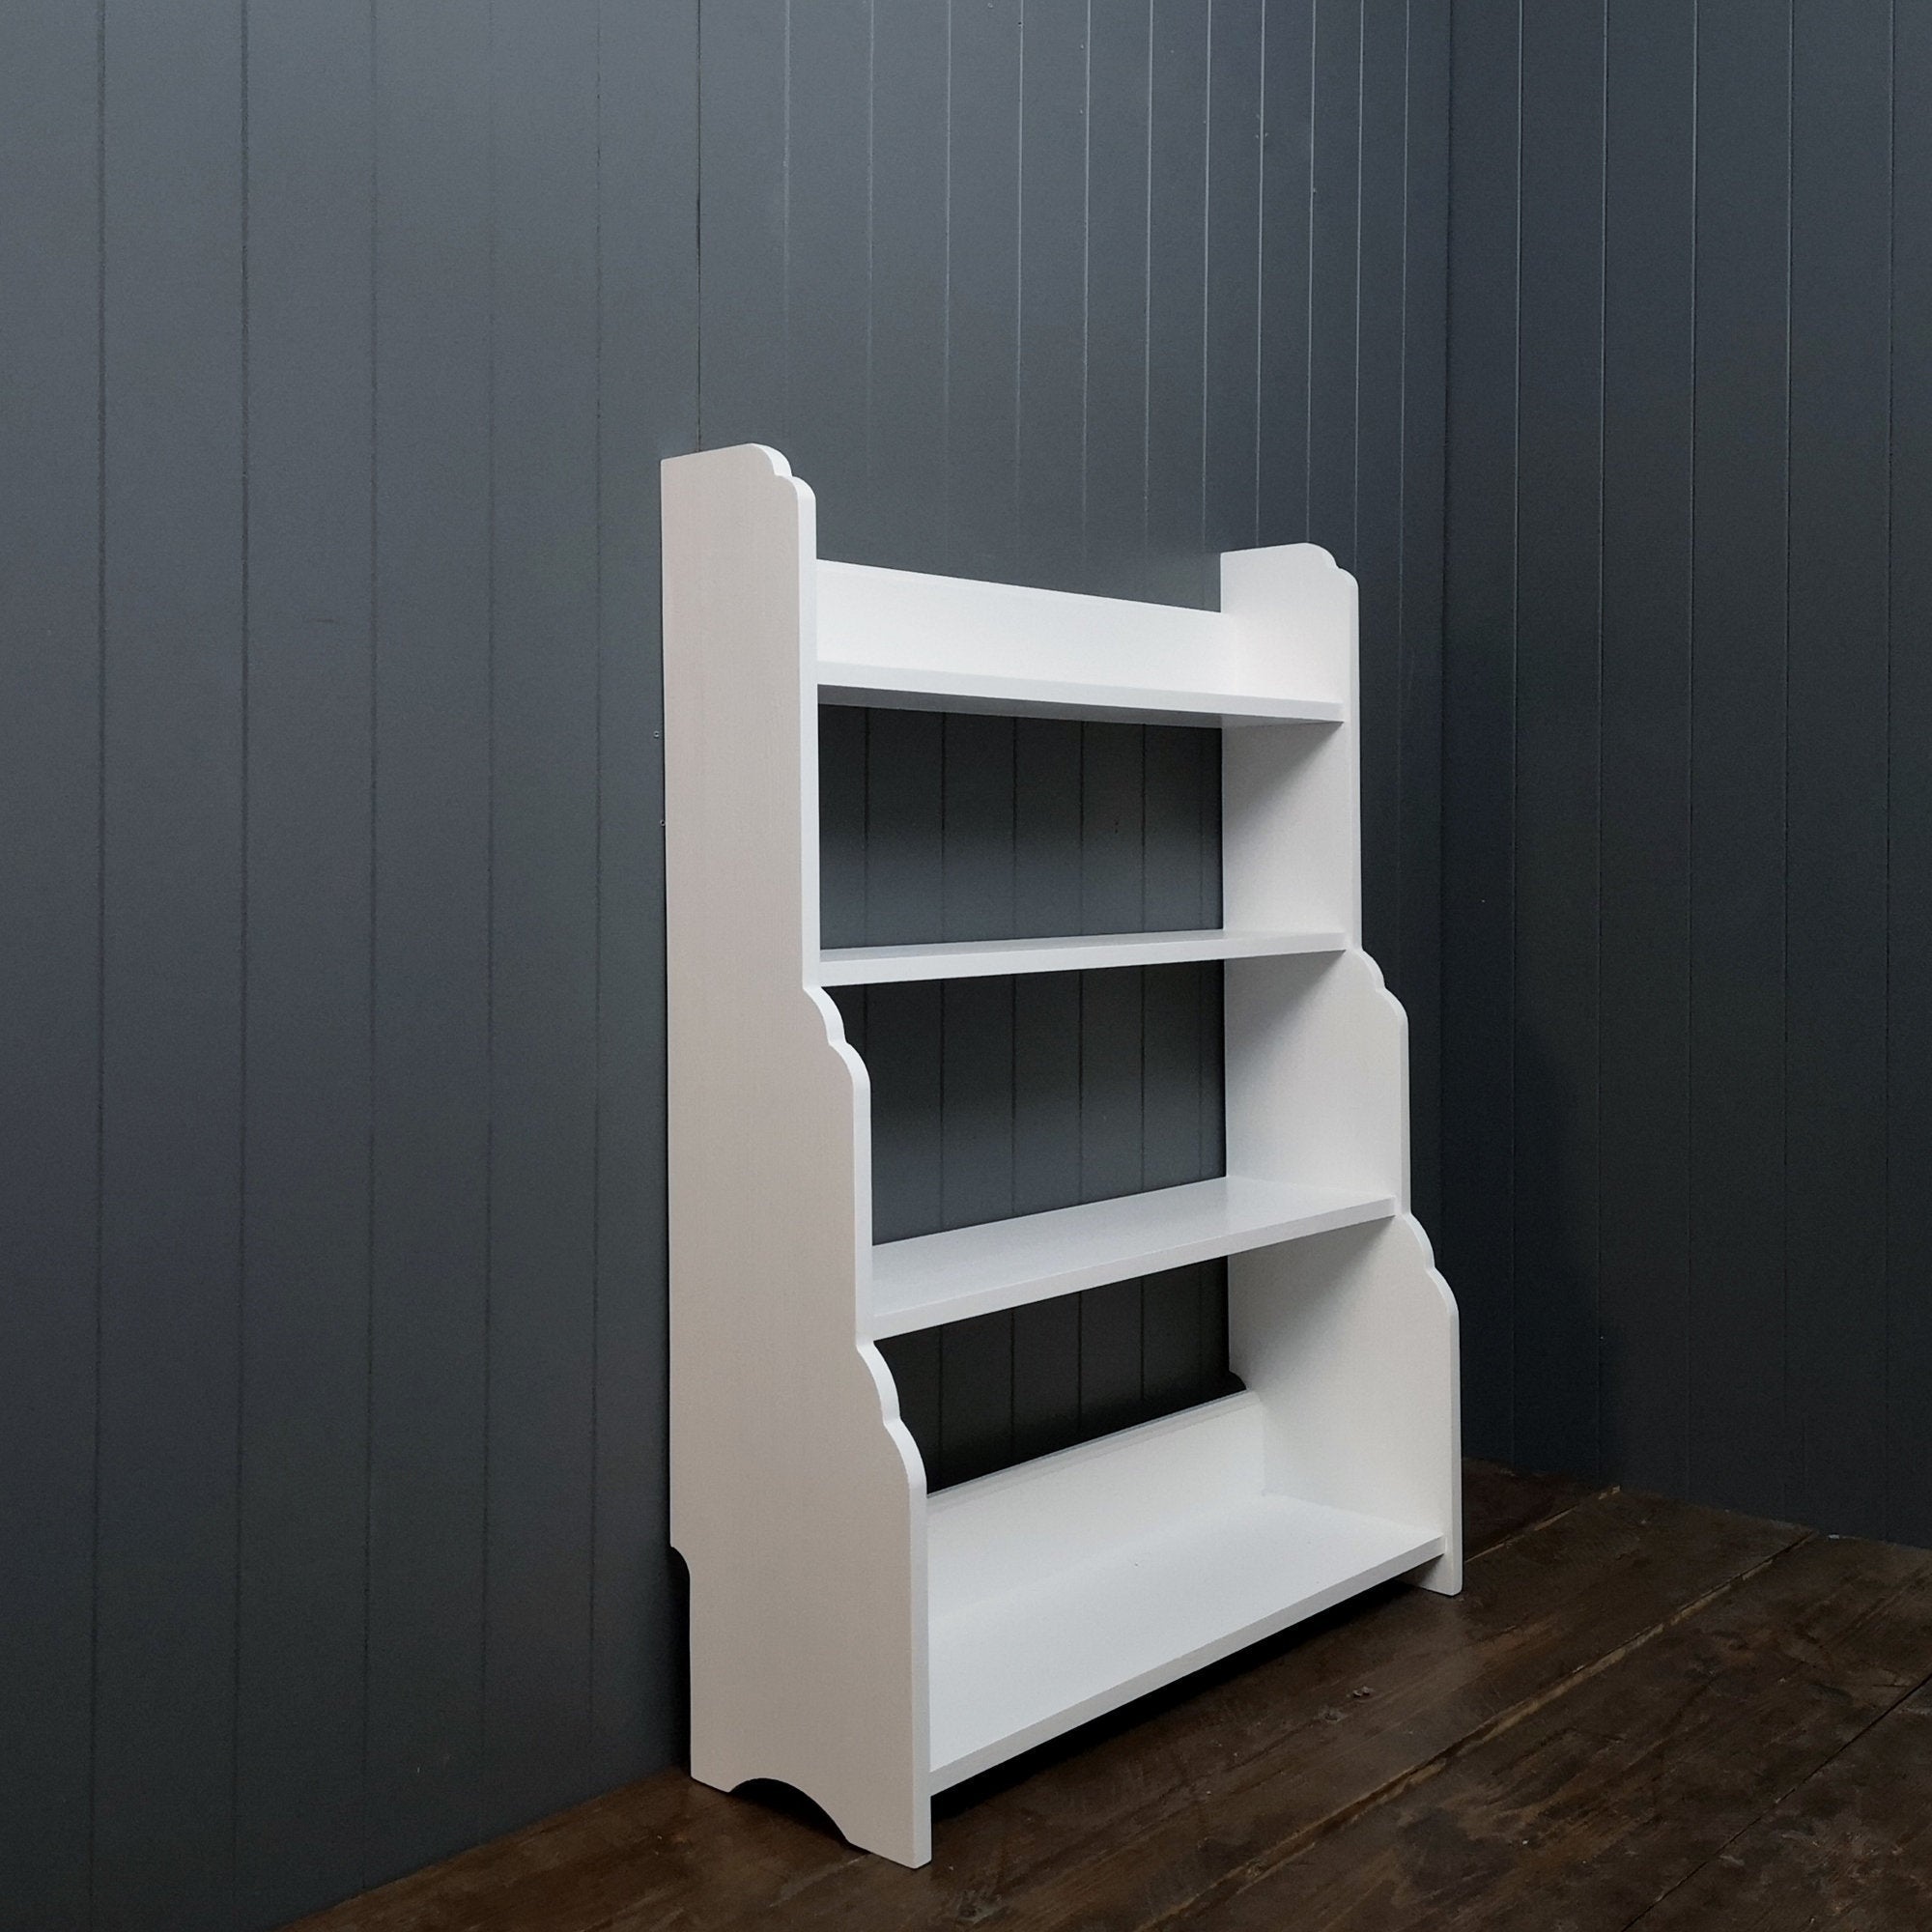 A solid wooden bookcase painted white with 4 shelves of different depths. Smallest at the top to deepest at the bottom.